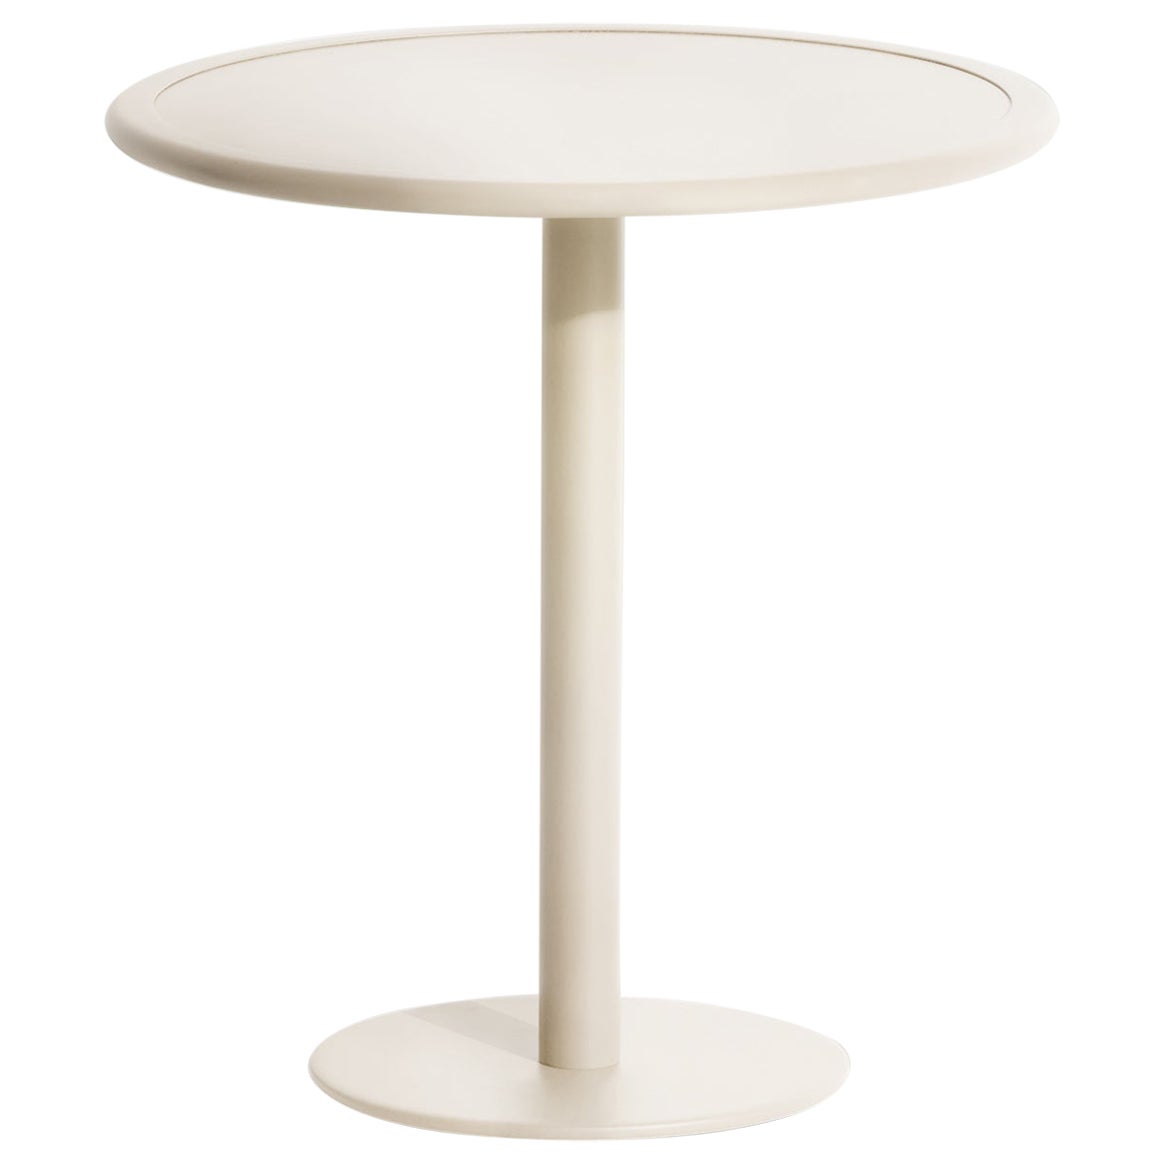 Petite Friture Week-End Bistro Round Dining Table in Ivory Aluminium, 2017 For Sale